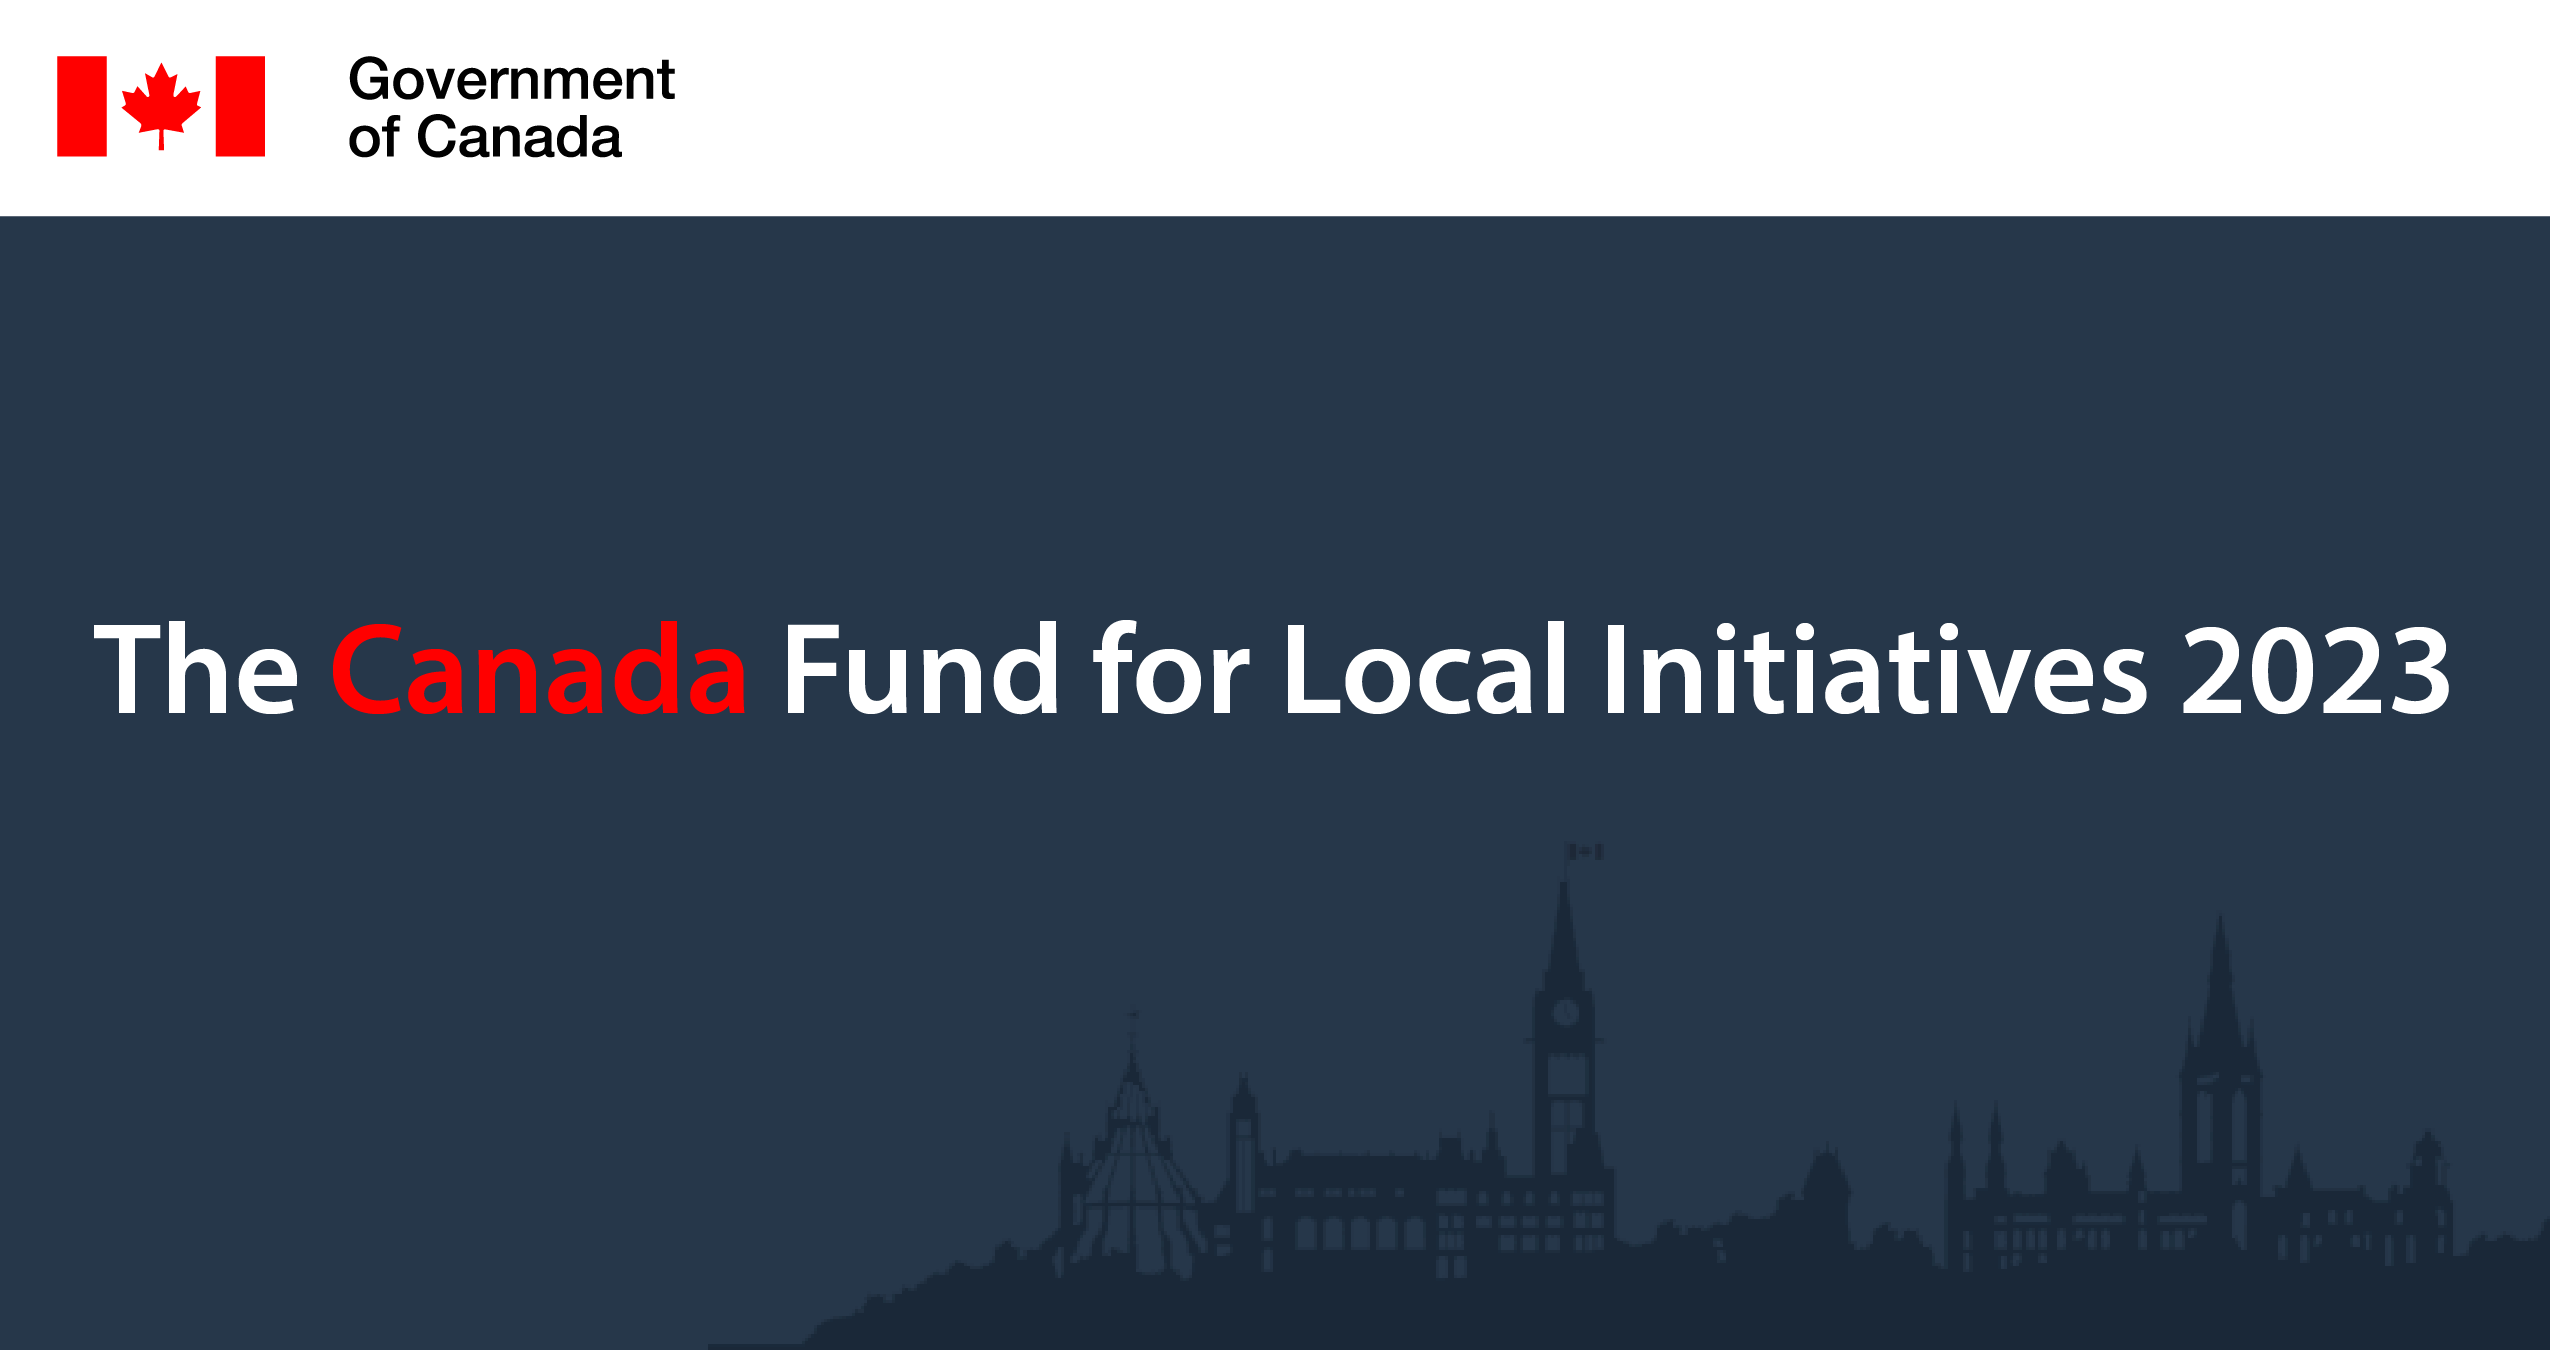 The Canada Fund For Local Initiatives 2023 